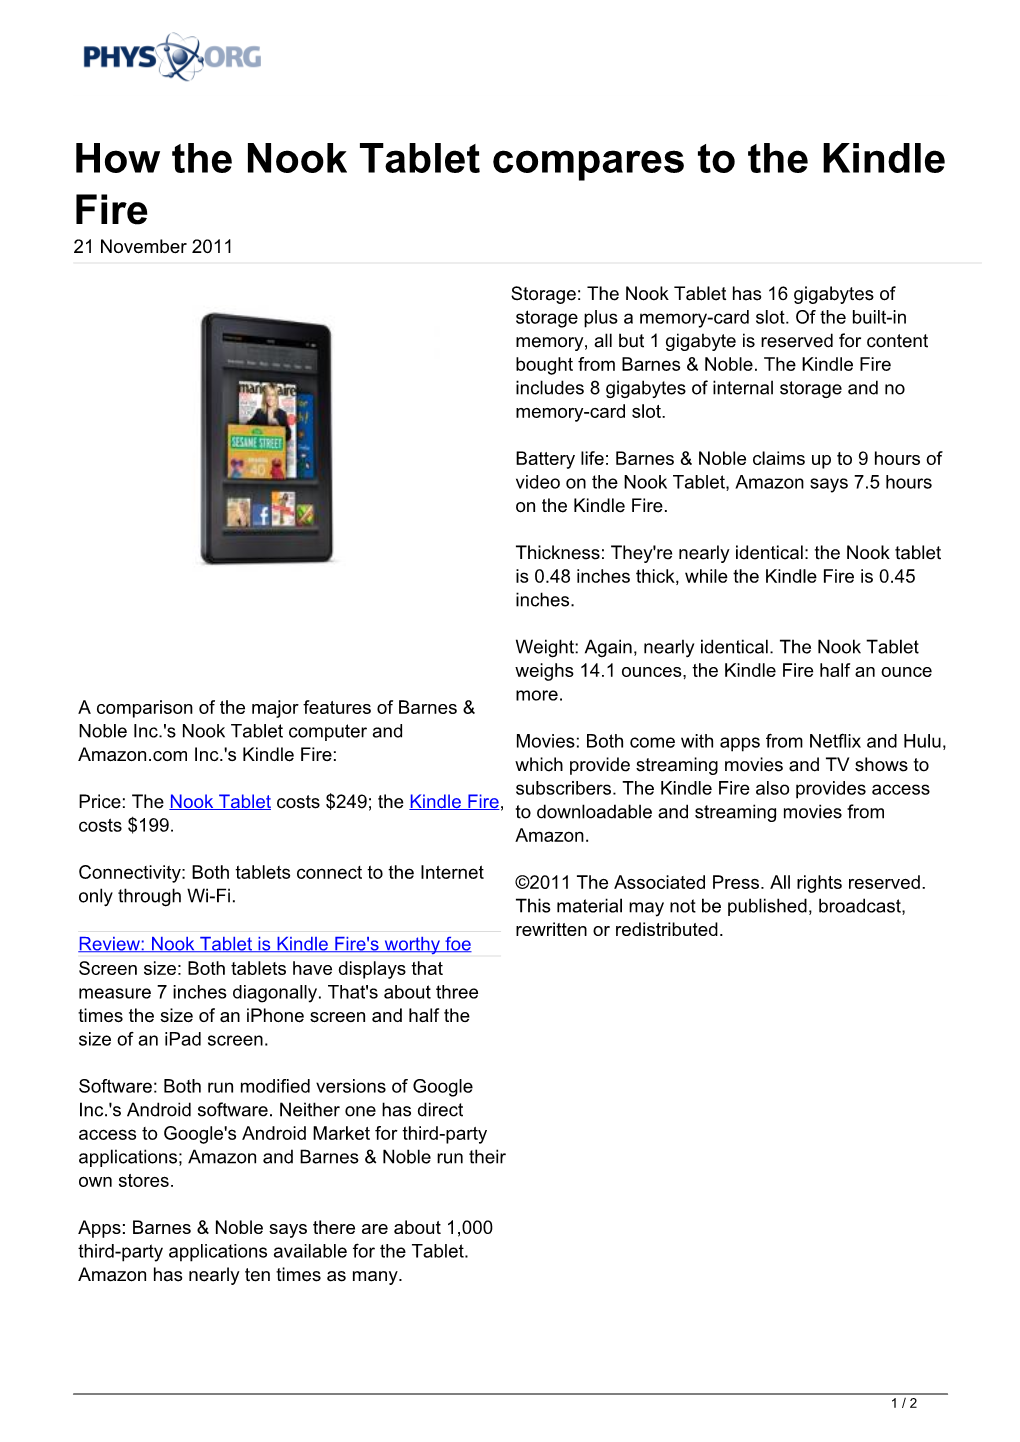 How the Nook Tablet Compares to the Kindle Fire 21 November 2011